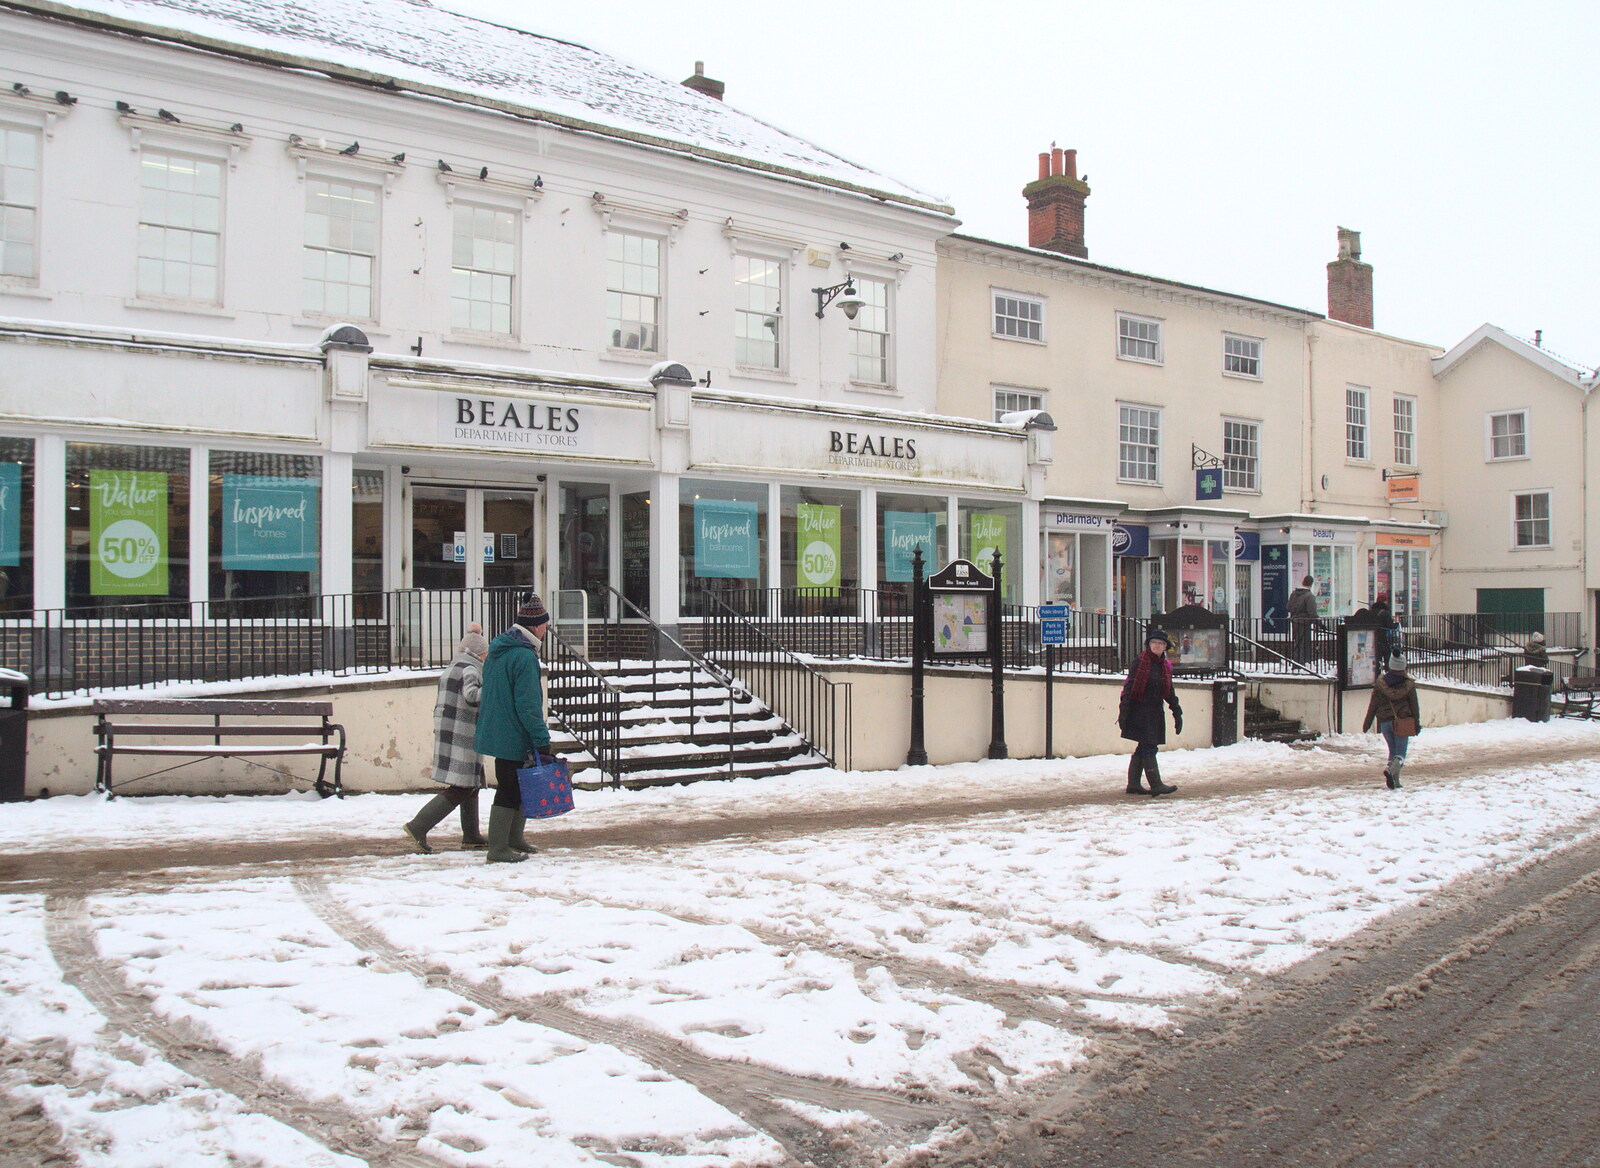 Beales on the Market Place from More March Snow and a Postcard from Diss, Norfolk - 3rd March 2018